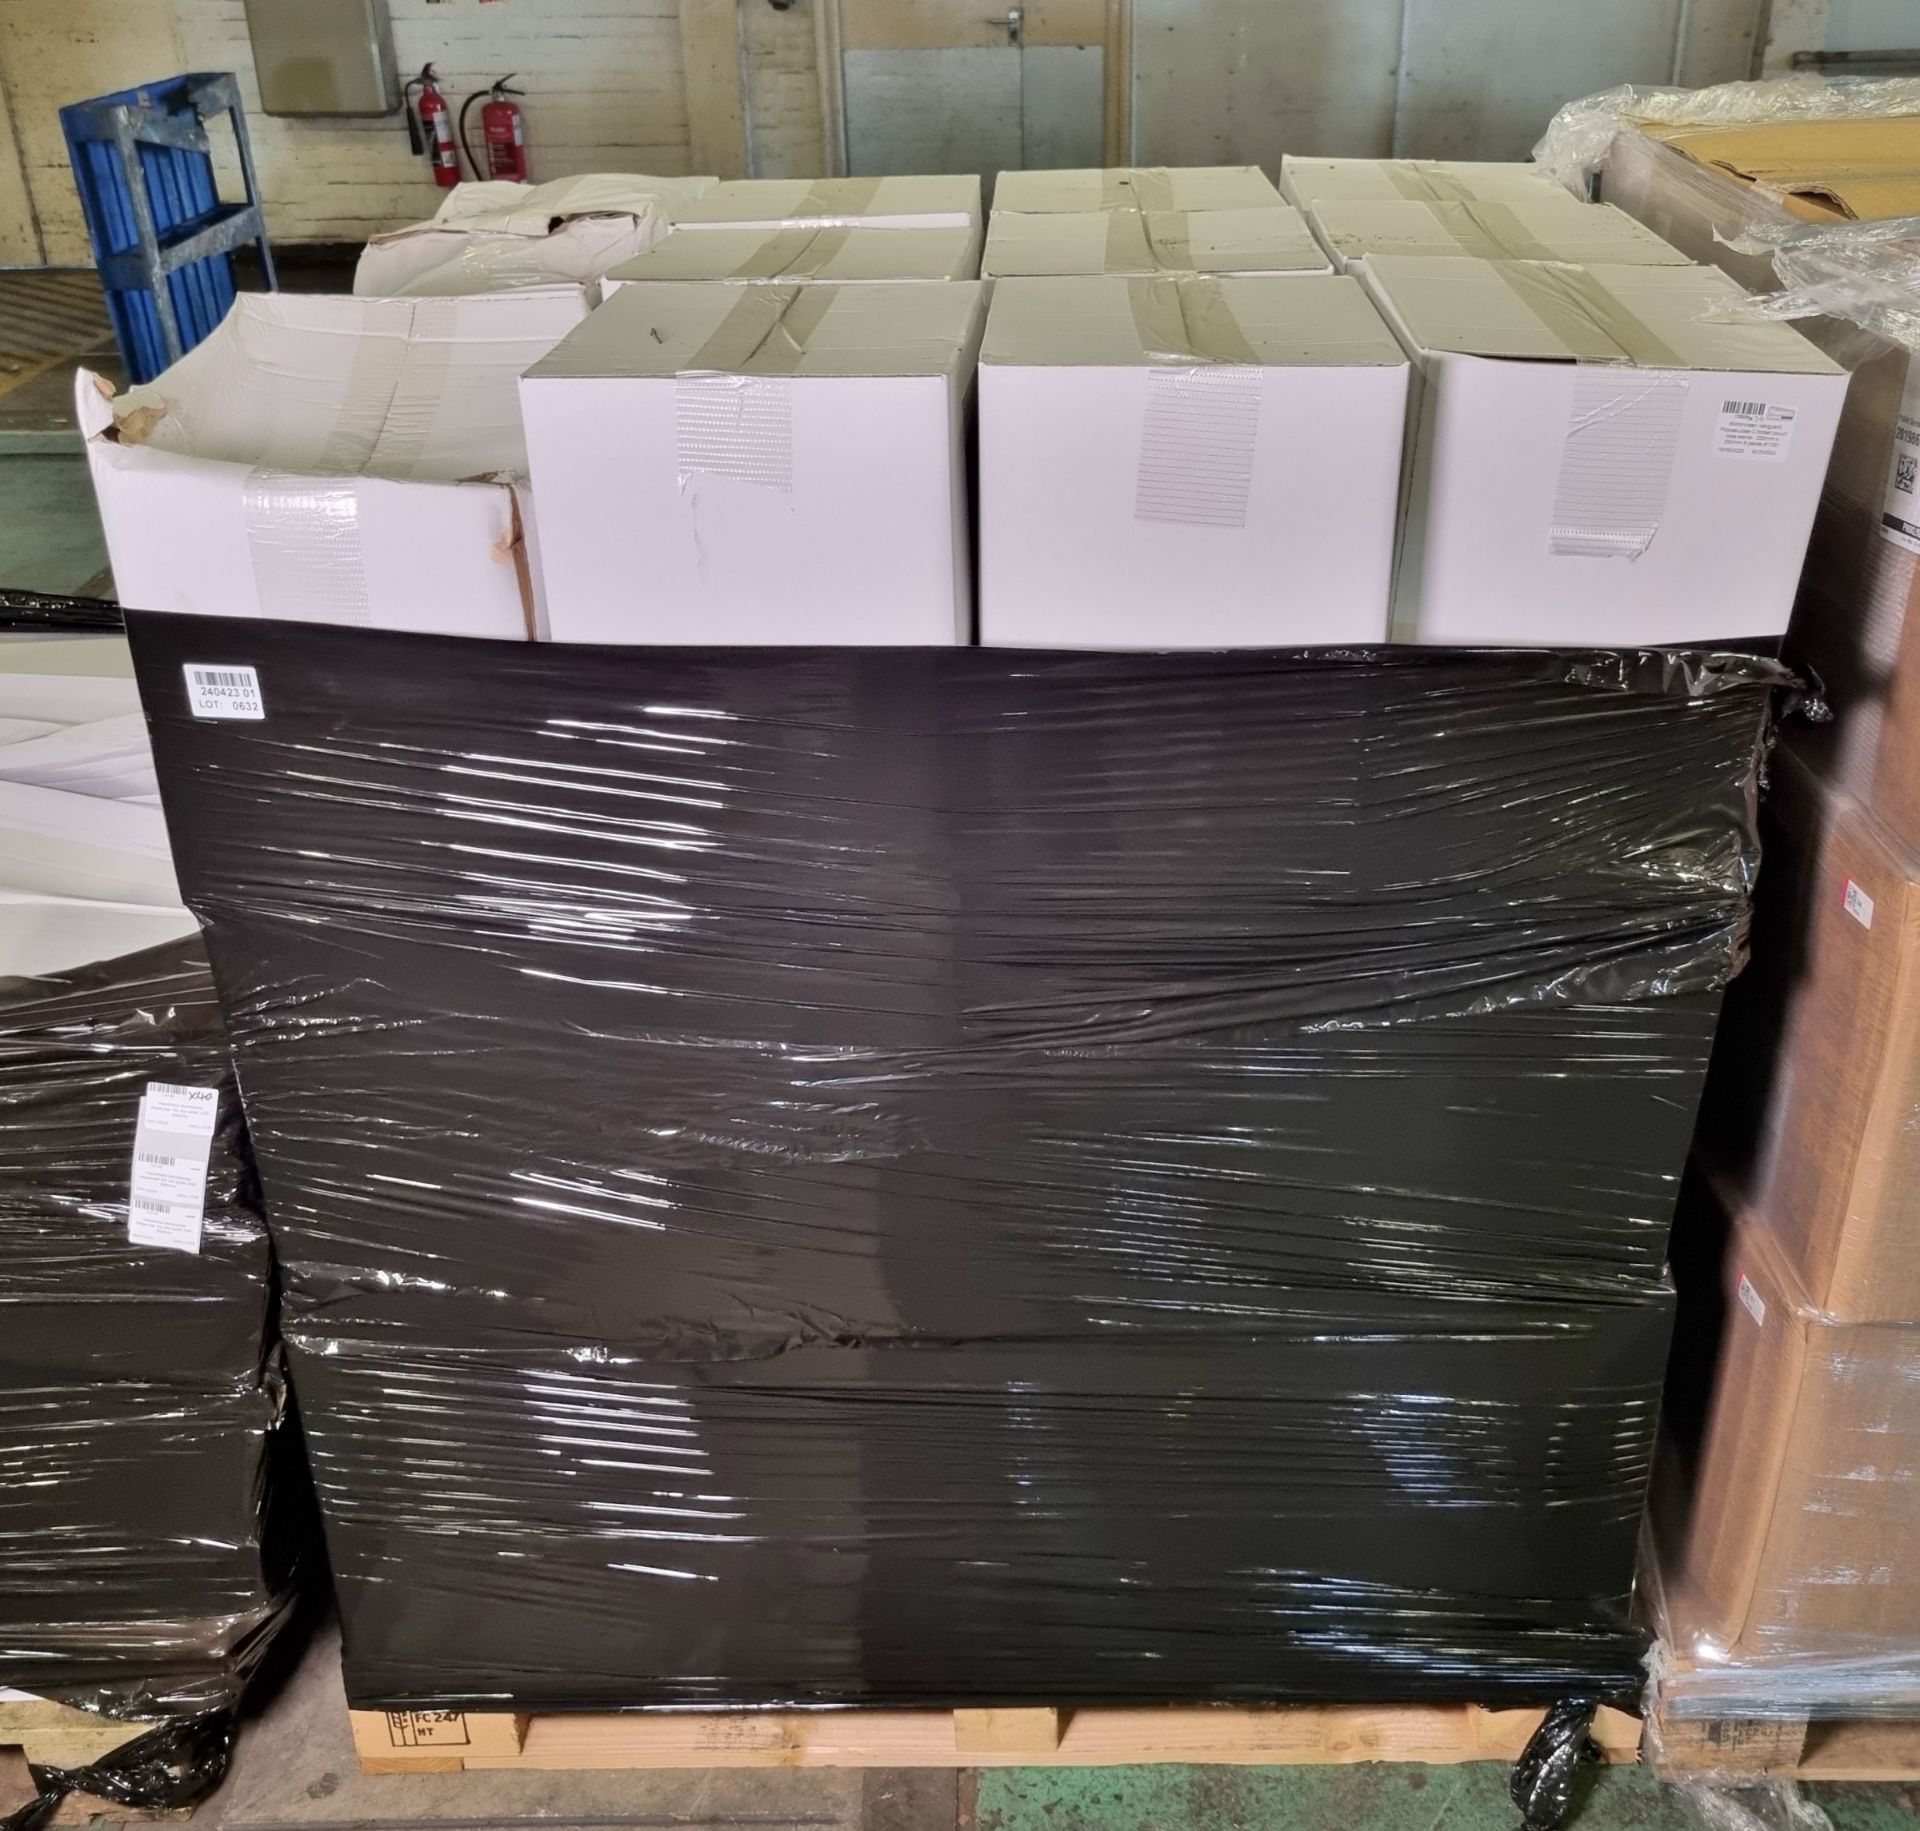 36x boxes of Micronclean Veriguard Polycellulose C-folded pouch wipe sterile - 230mm x 230mm - Bild 3 aus 4